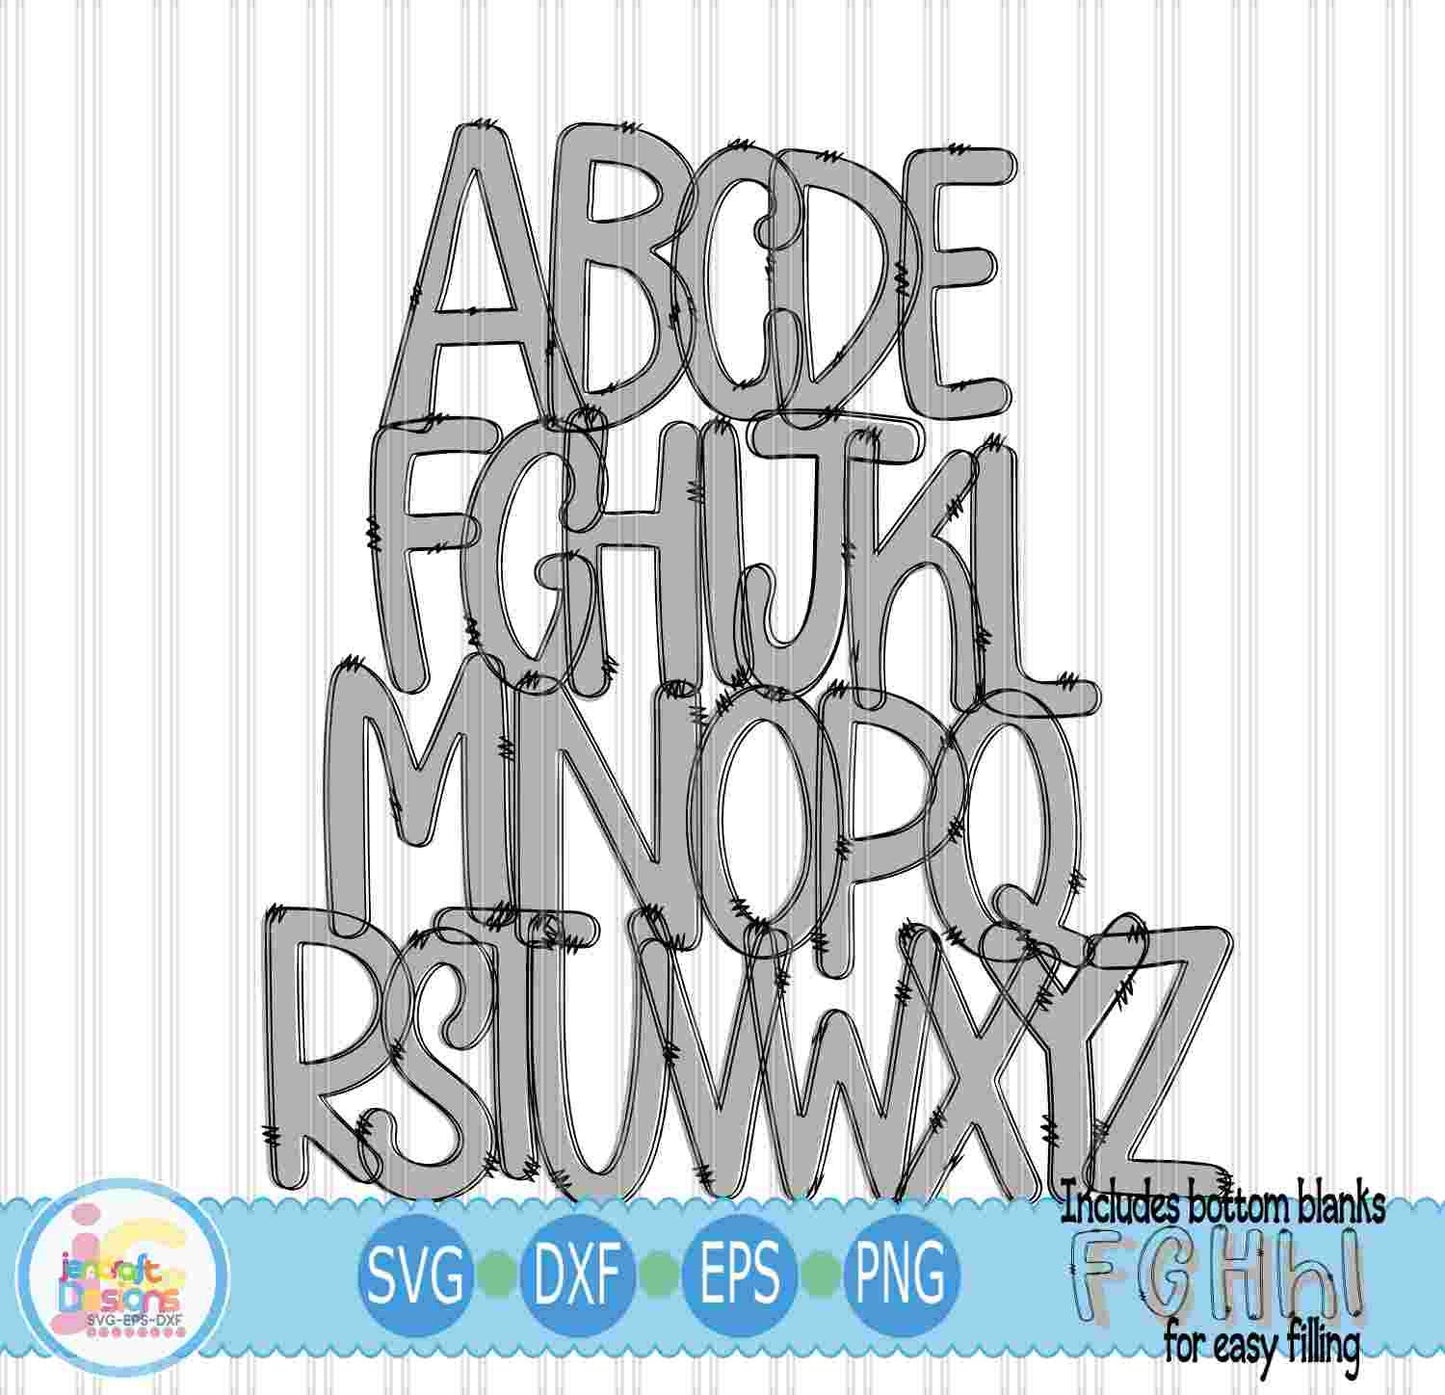 Blank Doodle Letters Alphabet Upper and Lower Png Print File for Sublimation or Printing - JenCraft Designs